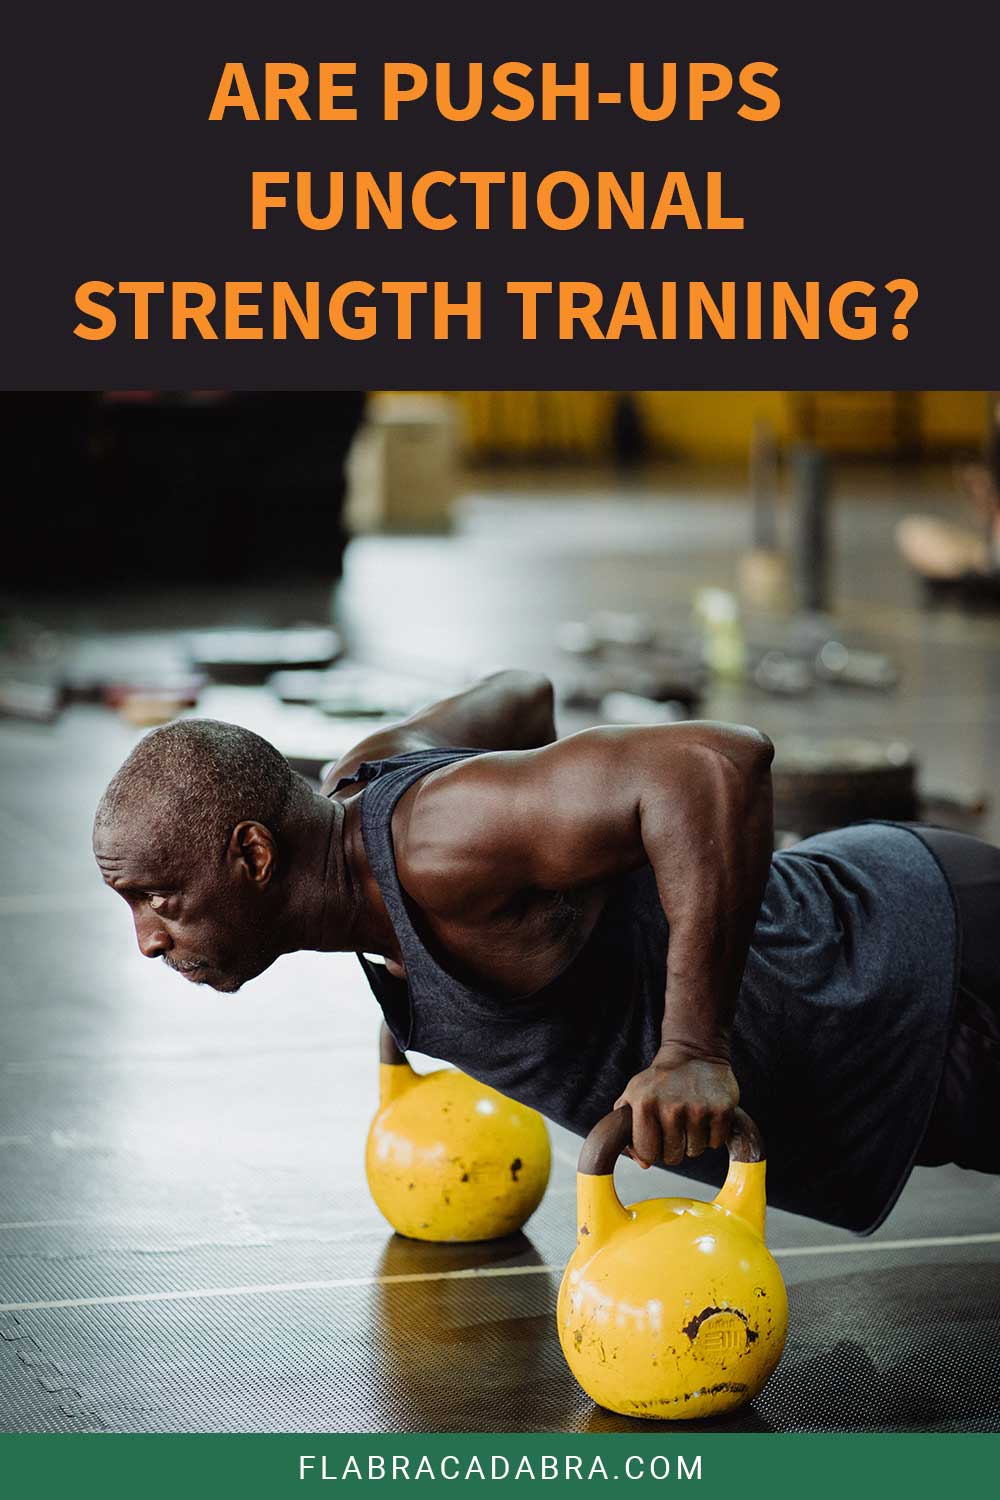 Man is doing push up exercise holding yellow kettlebell in a gym - Are Push-Ups Functional Strength Training?